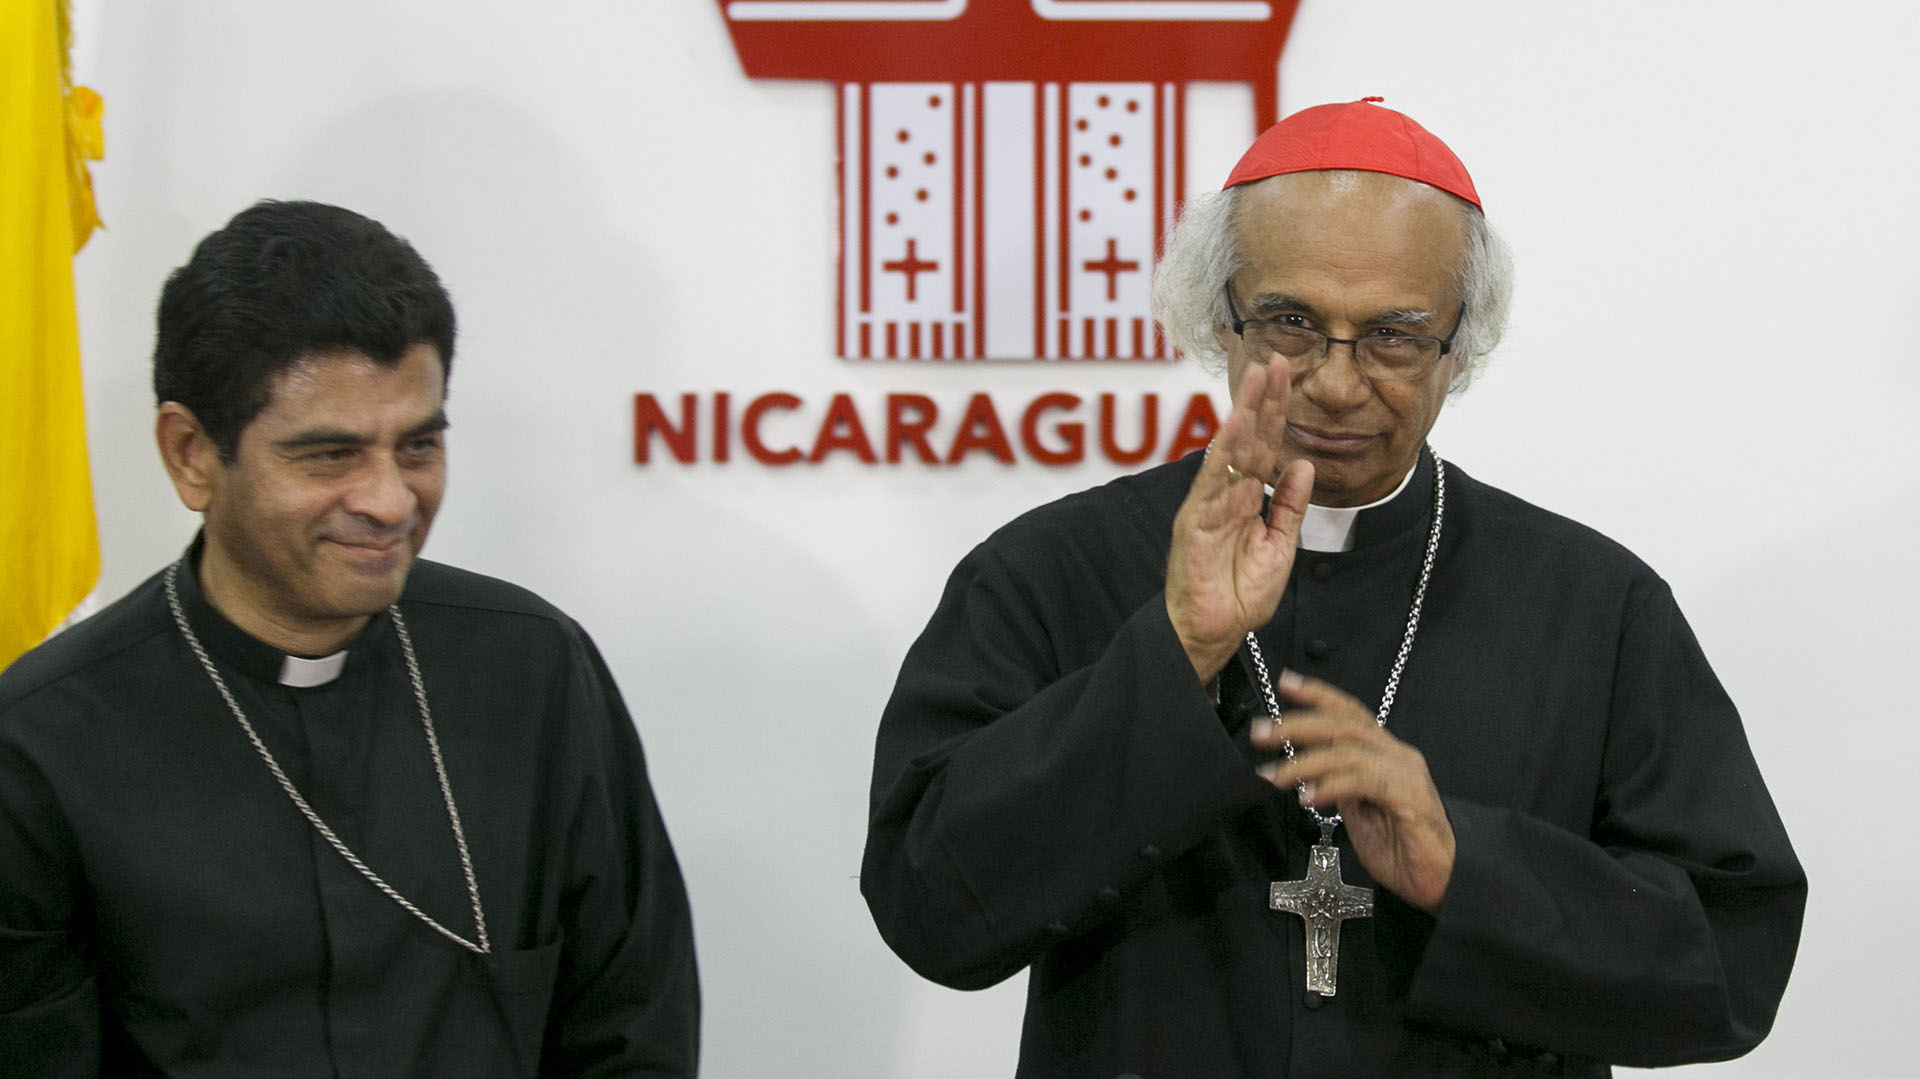 Bishops of Latin America denounce the "difficult situation" of the Catholic Church in Nicaragua